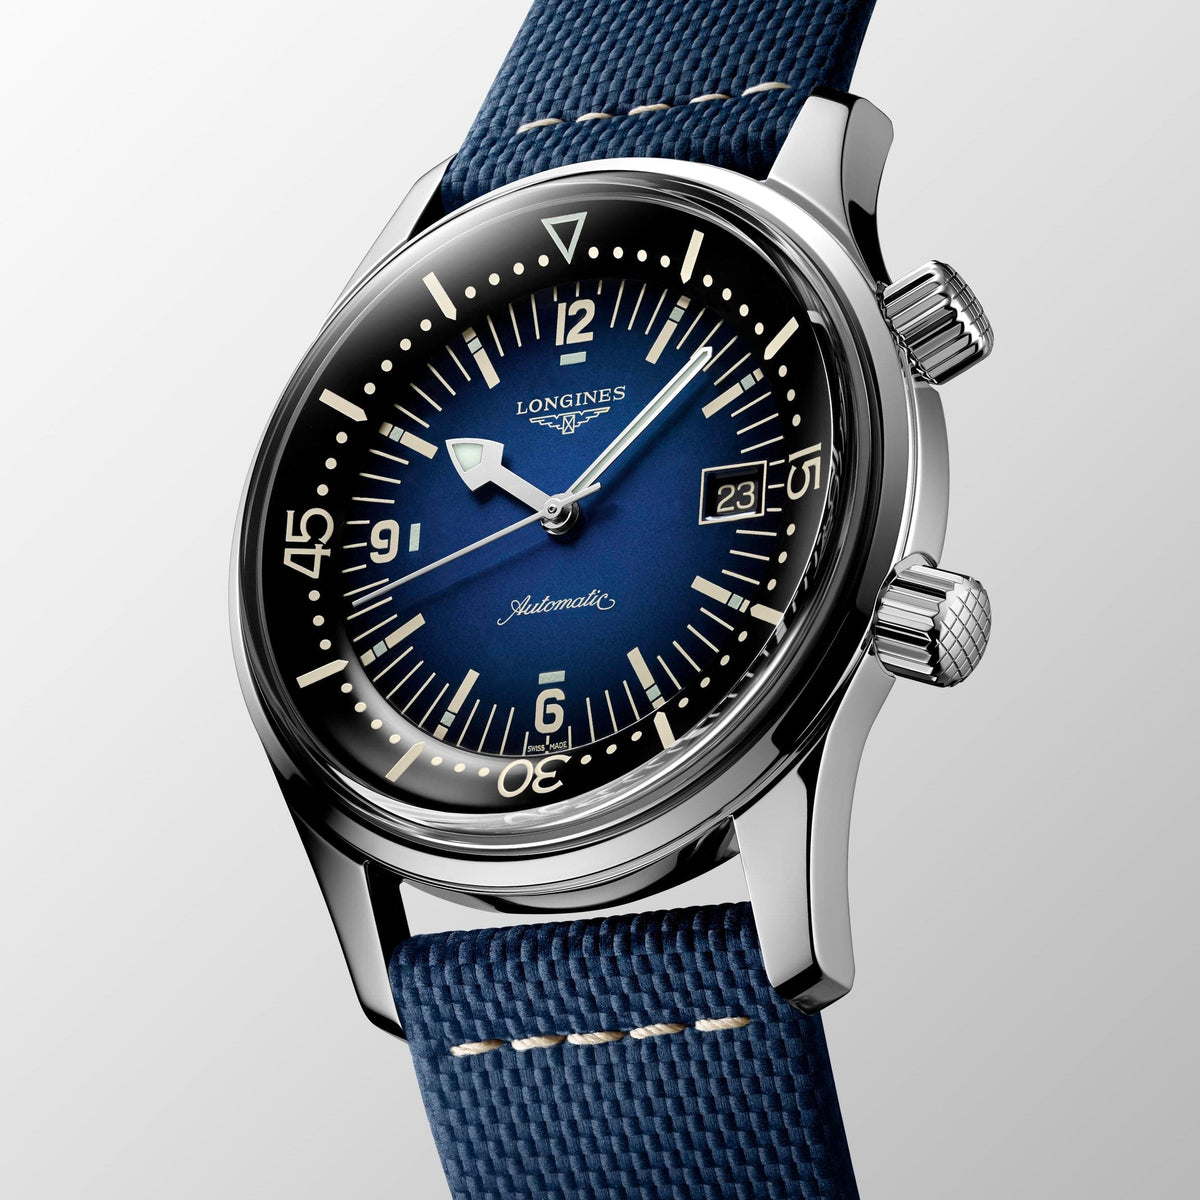 The Longines Legend Diver Watch 42mm Automatic, Long's Jewelers